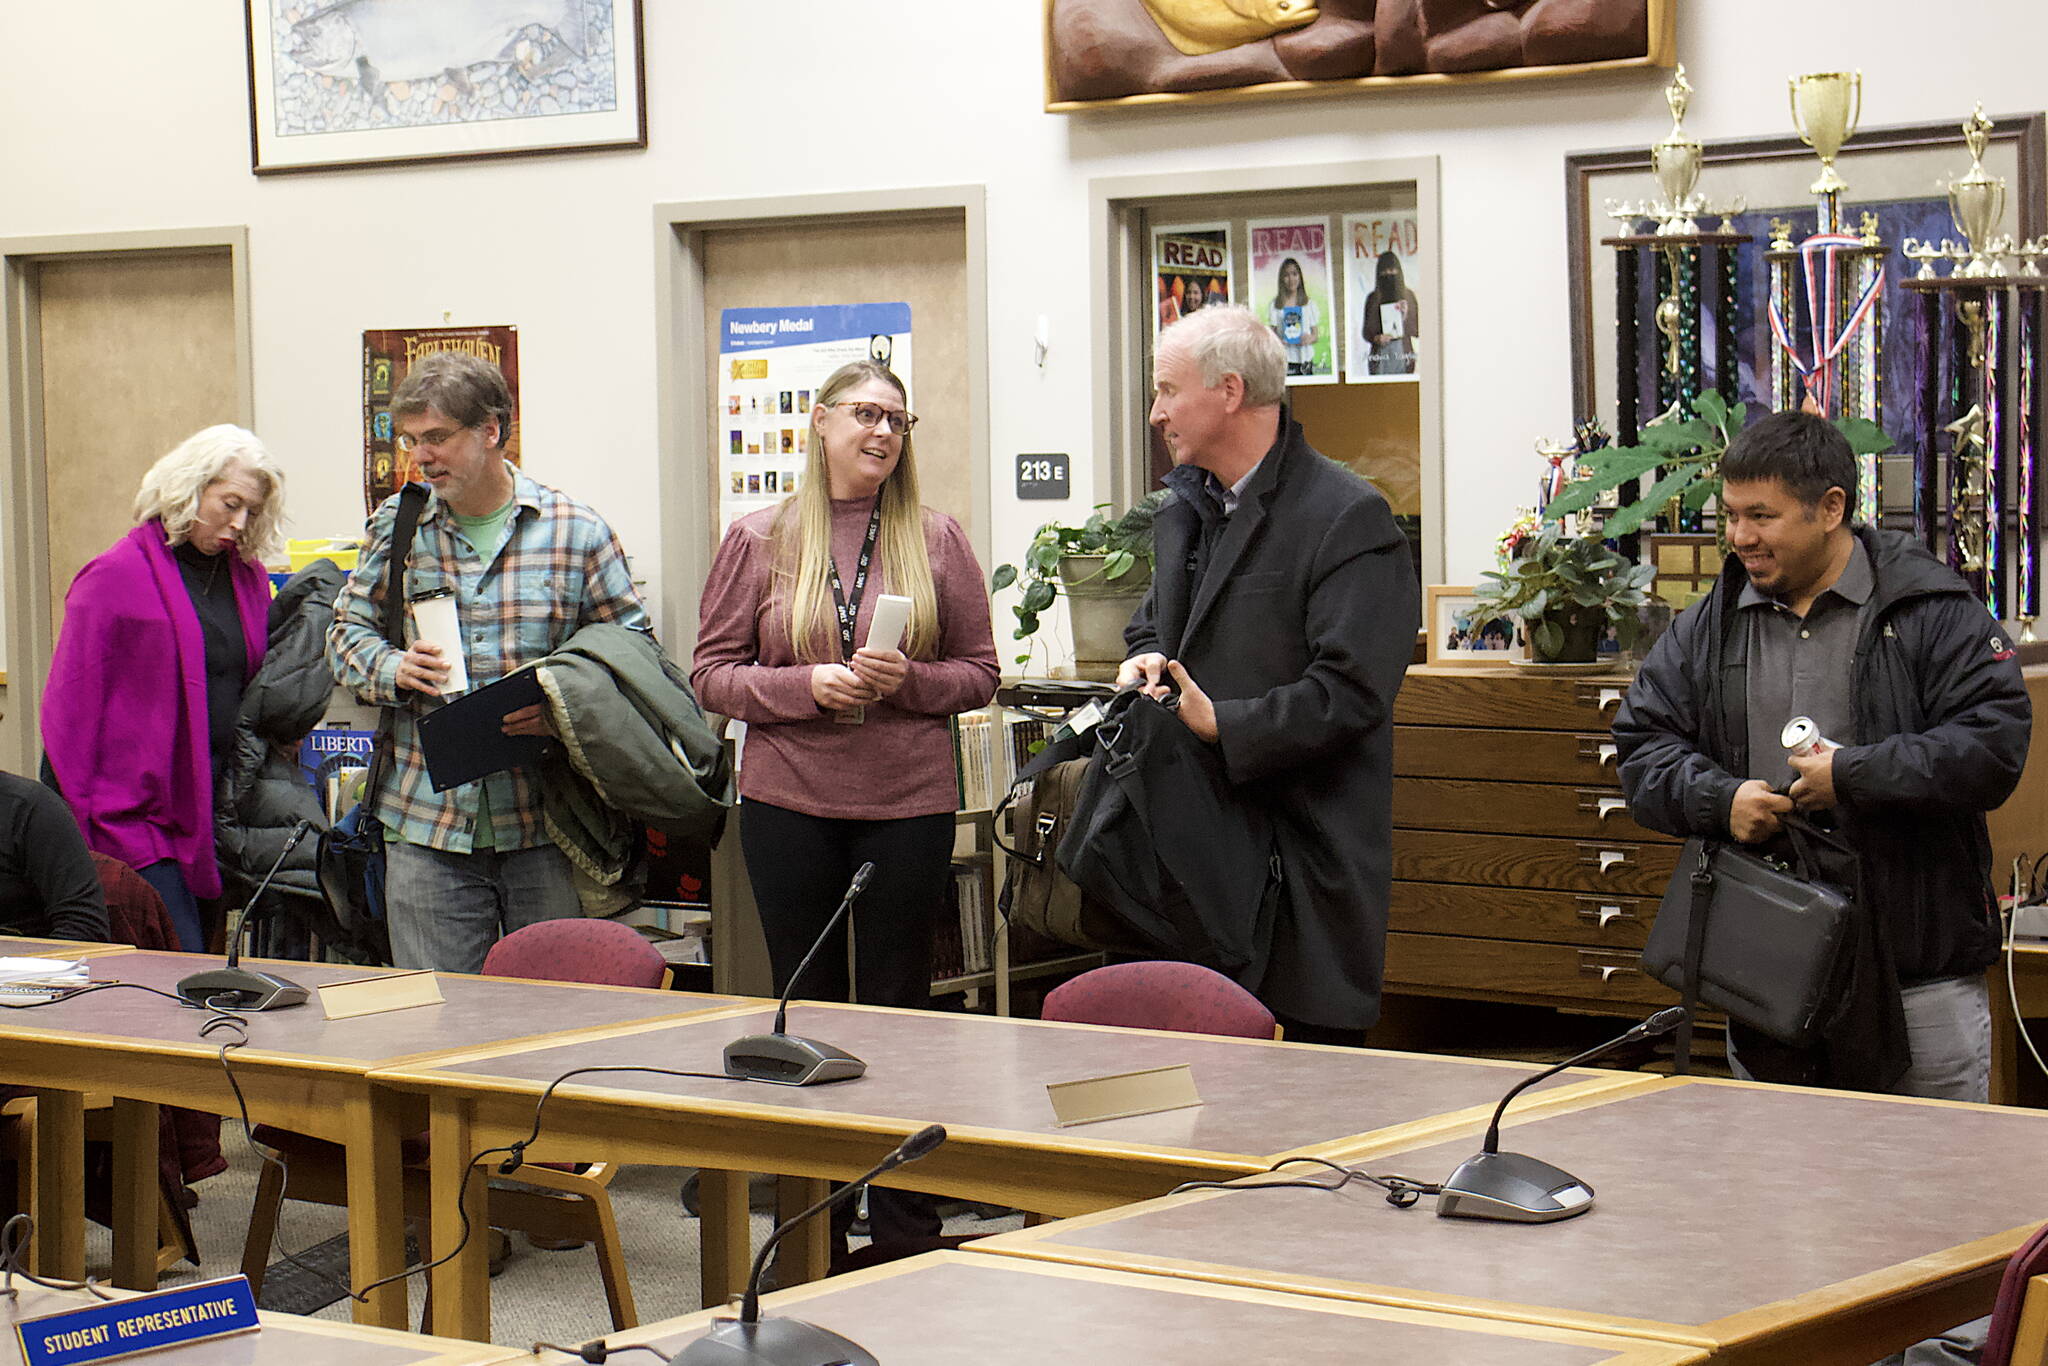 Newly-sworn Juneau Board of Education members Britteny Cioni-Haywood and David Noon (left) prepare to take their seats as outgoing members Brian Holst and Martin Stepetin Sr. (right) depart during the board’s meeting Tuesday night at Juneau-Douglas High School: Yadaa.at Kalé. At center, Jessica Richmond, administrative assistant to the Juneau School District superintendent, replaces the name signs of the board members at the two seats. (Mark Sabbatini / Juneau Empire)